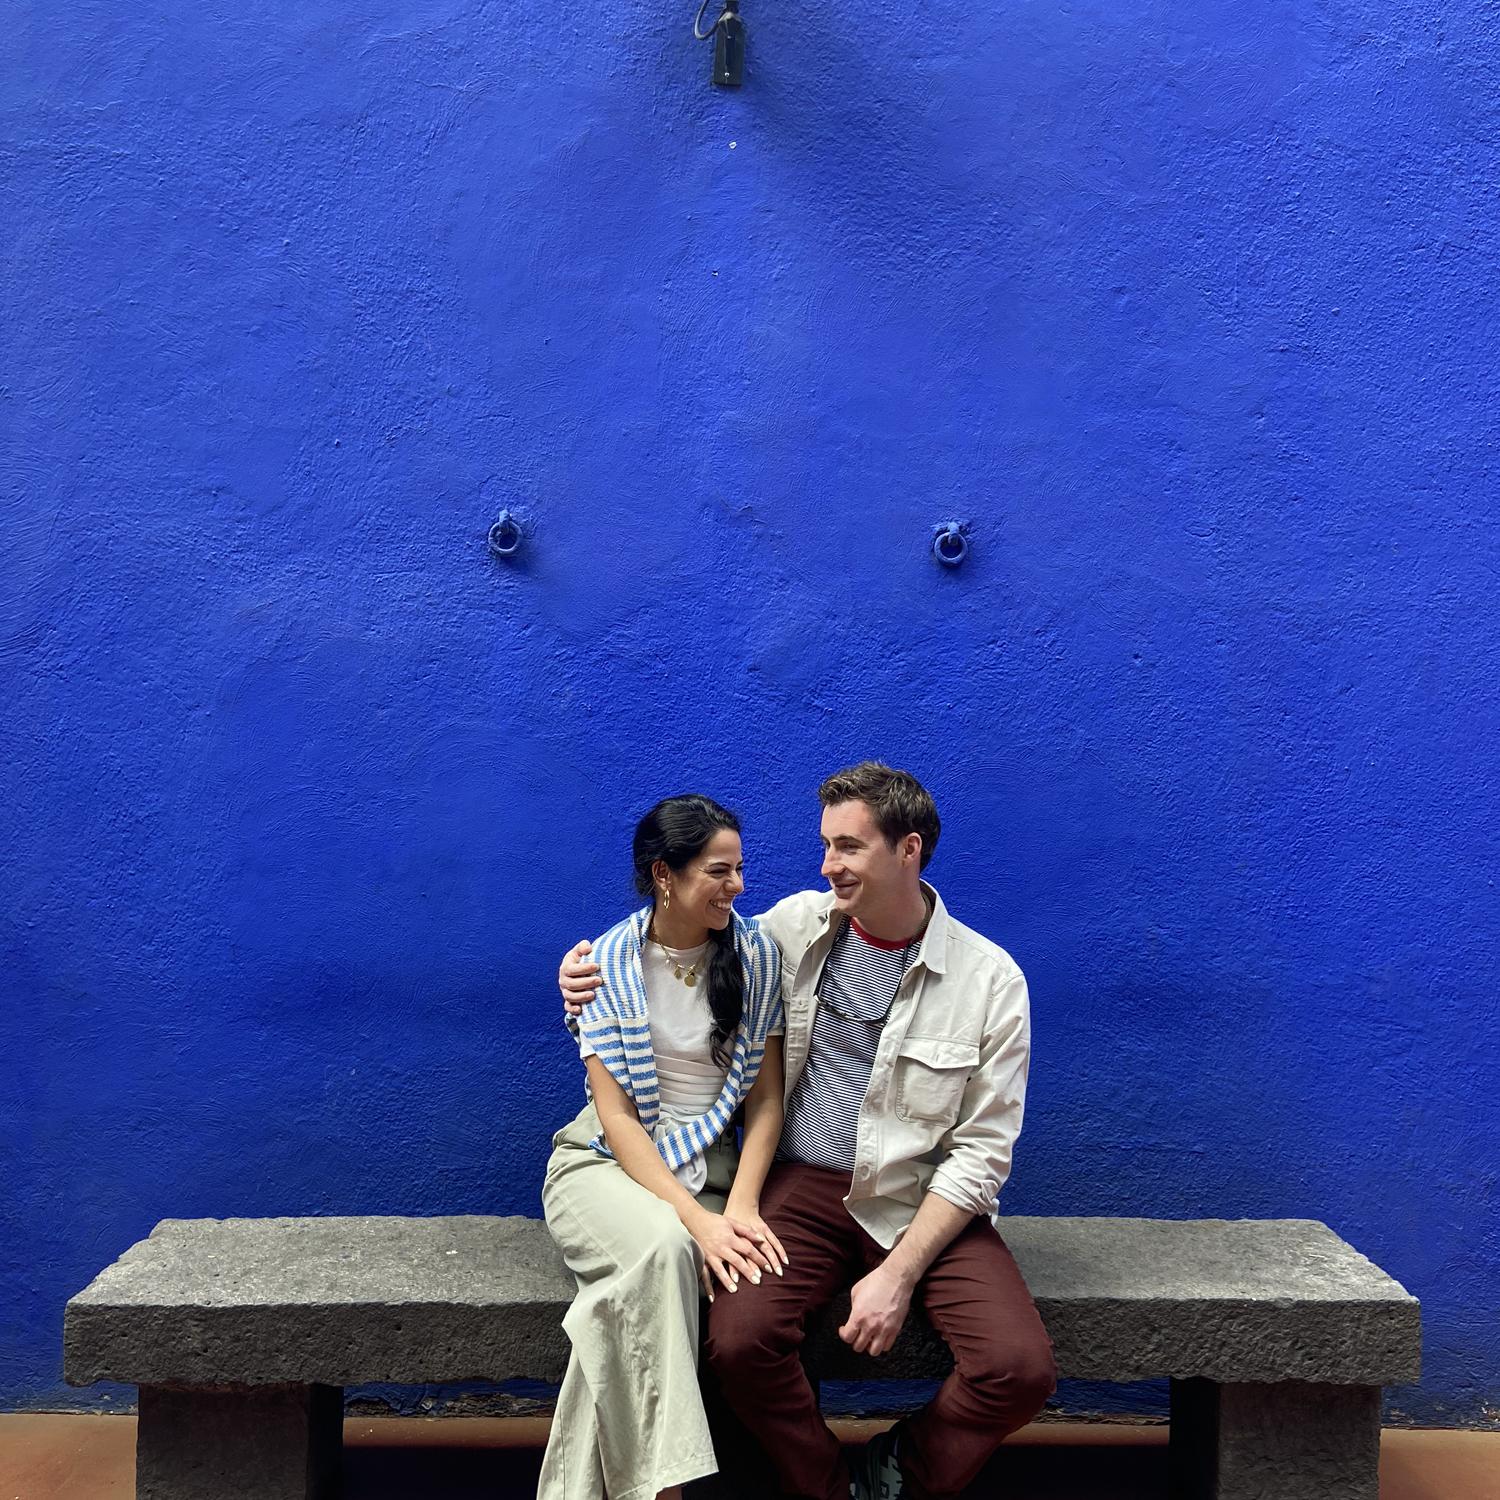 A real cute candid! Frida Kahlo Museum, Mexico City